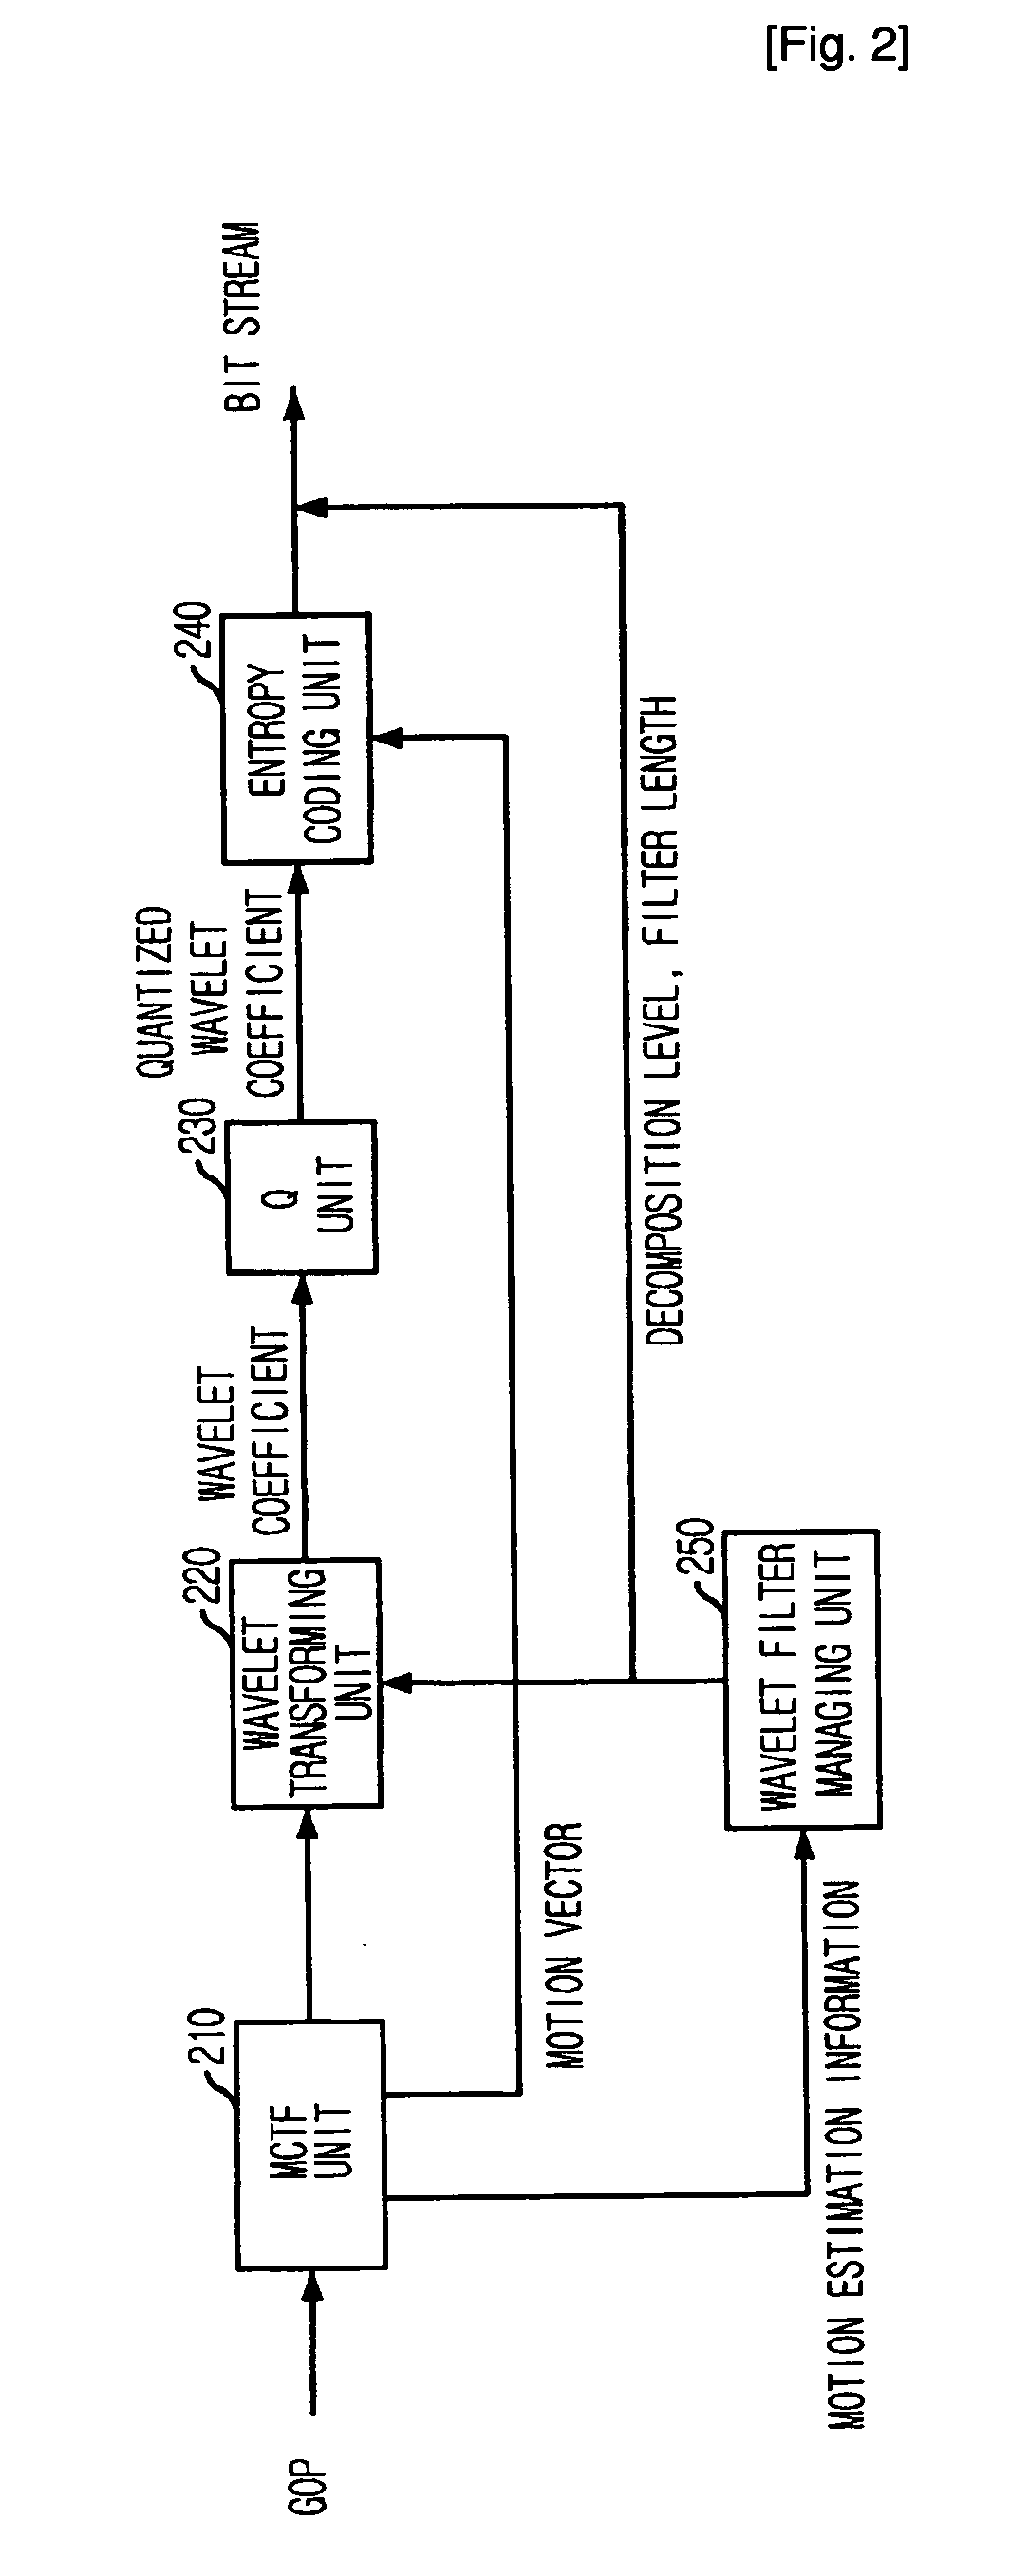 Interframe wavelet coding apparatus and method capable of adjusting computational complexity